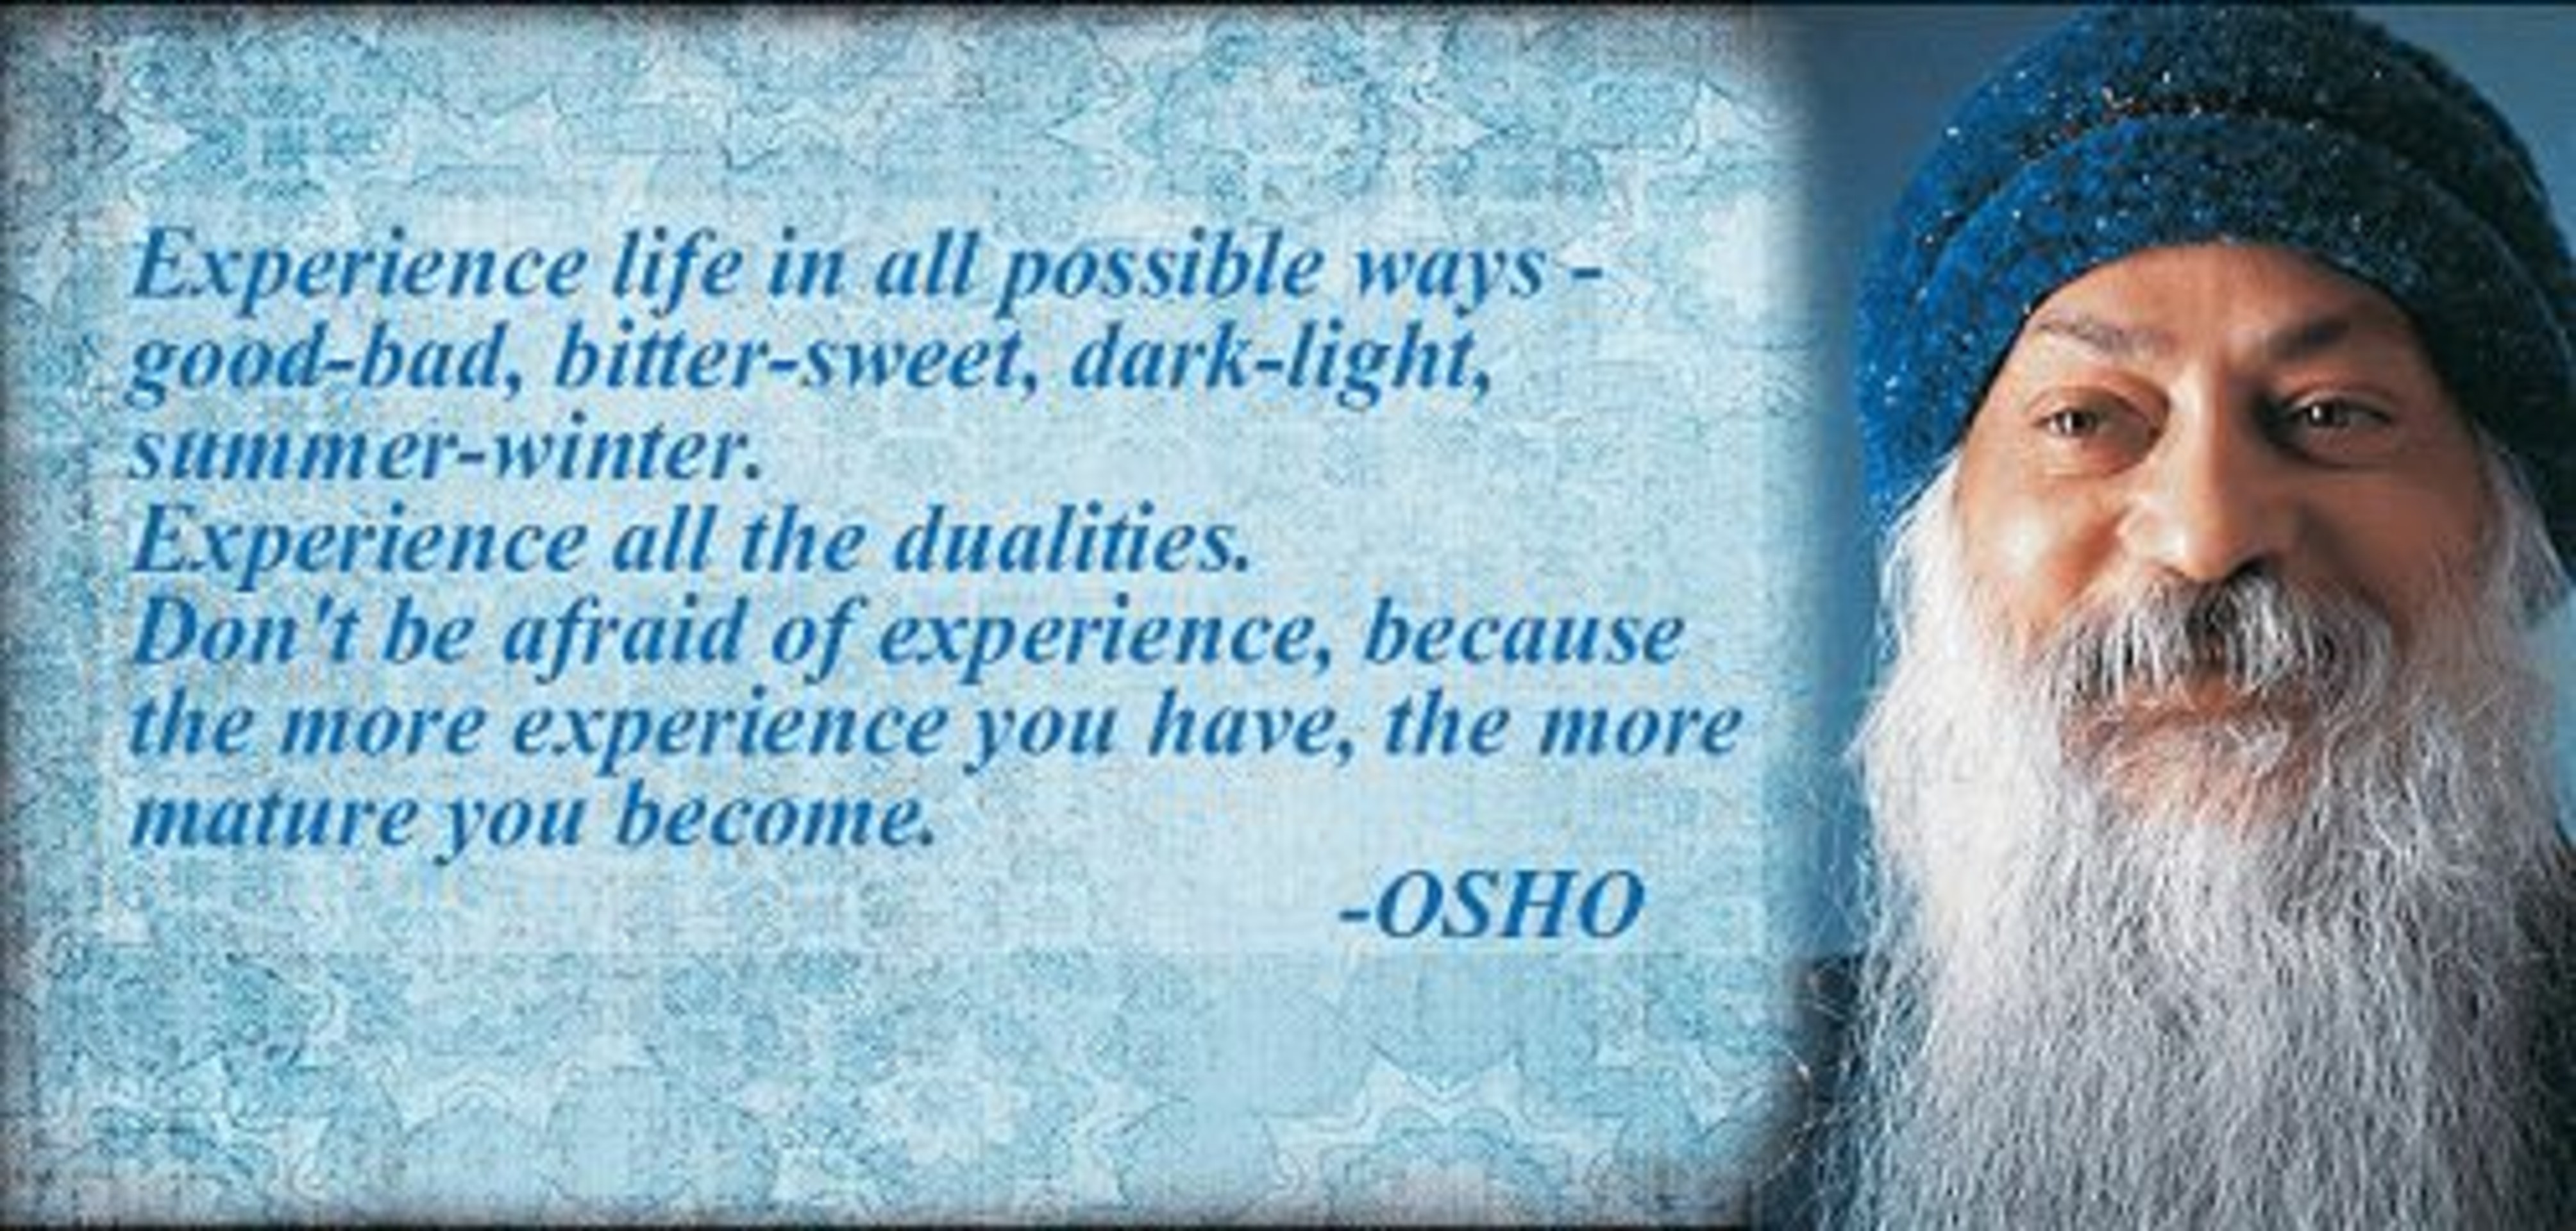 Android Mobiles Full Hd Resolutions 1080 X - Osho Life Quotes , HD Wallpaper & Backgrounds